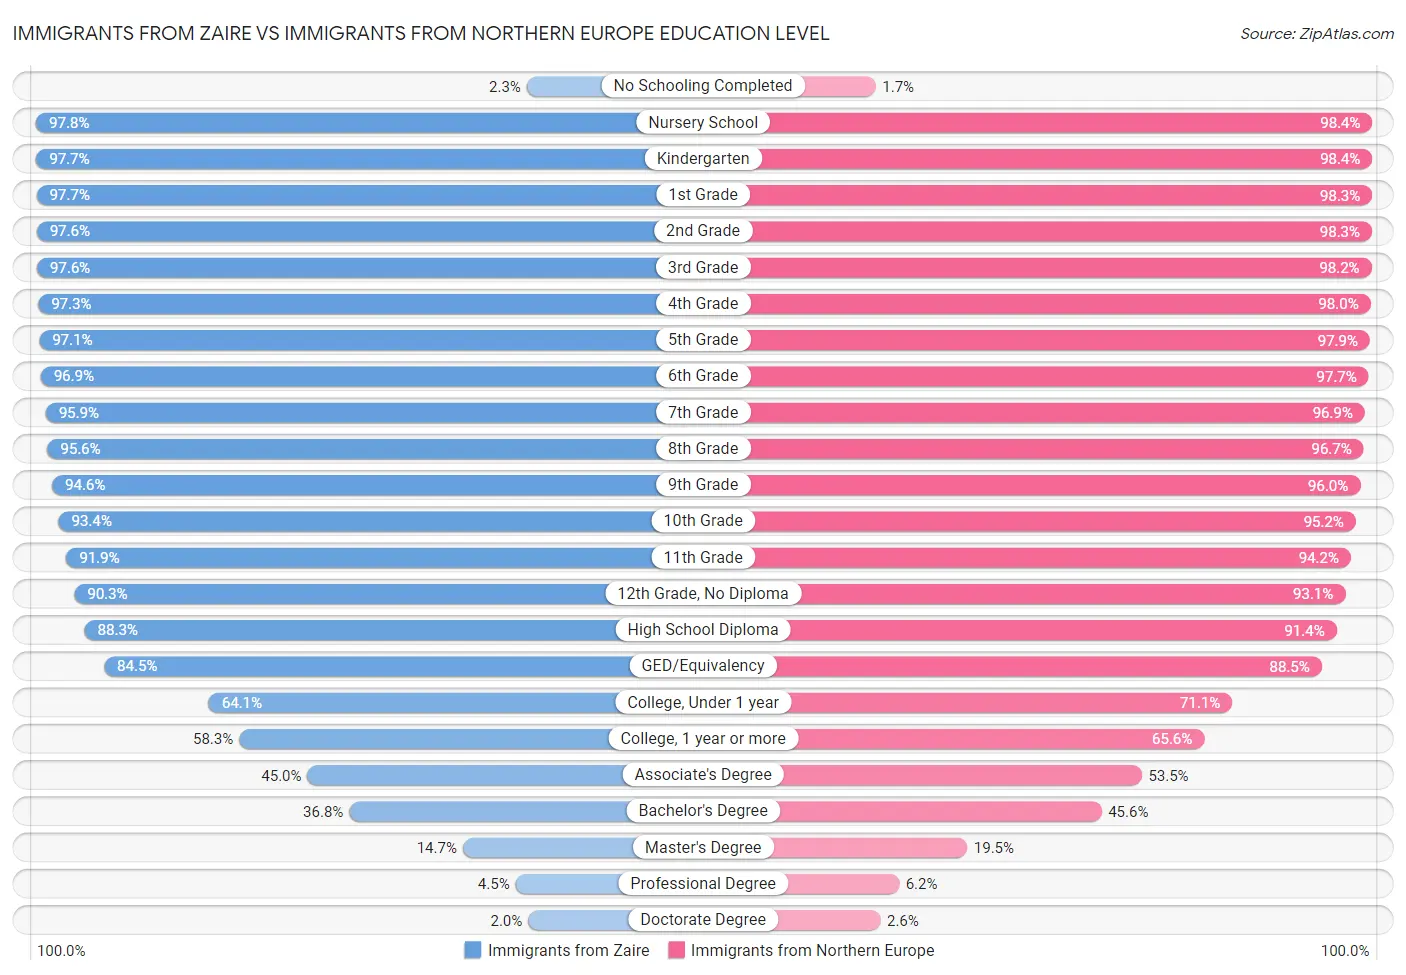 Immigrants from Zaire vs Immigrants from Northern Europe Education Level